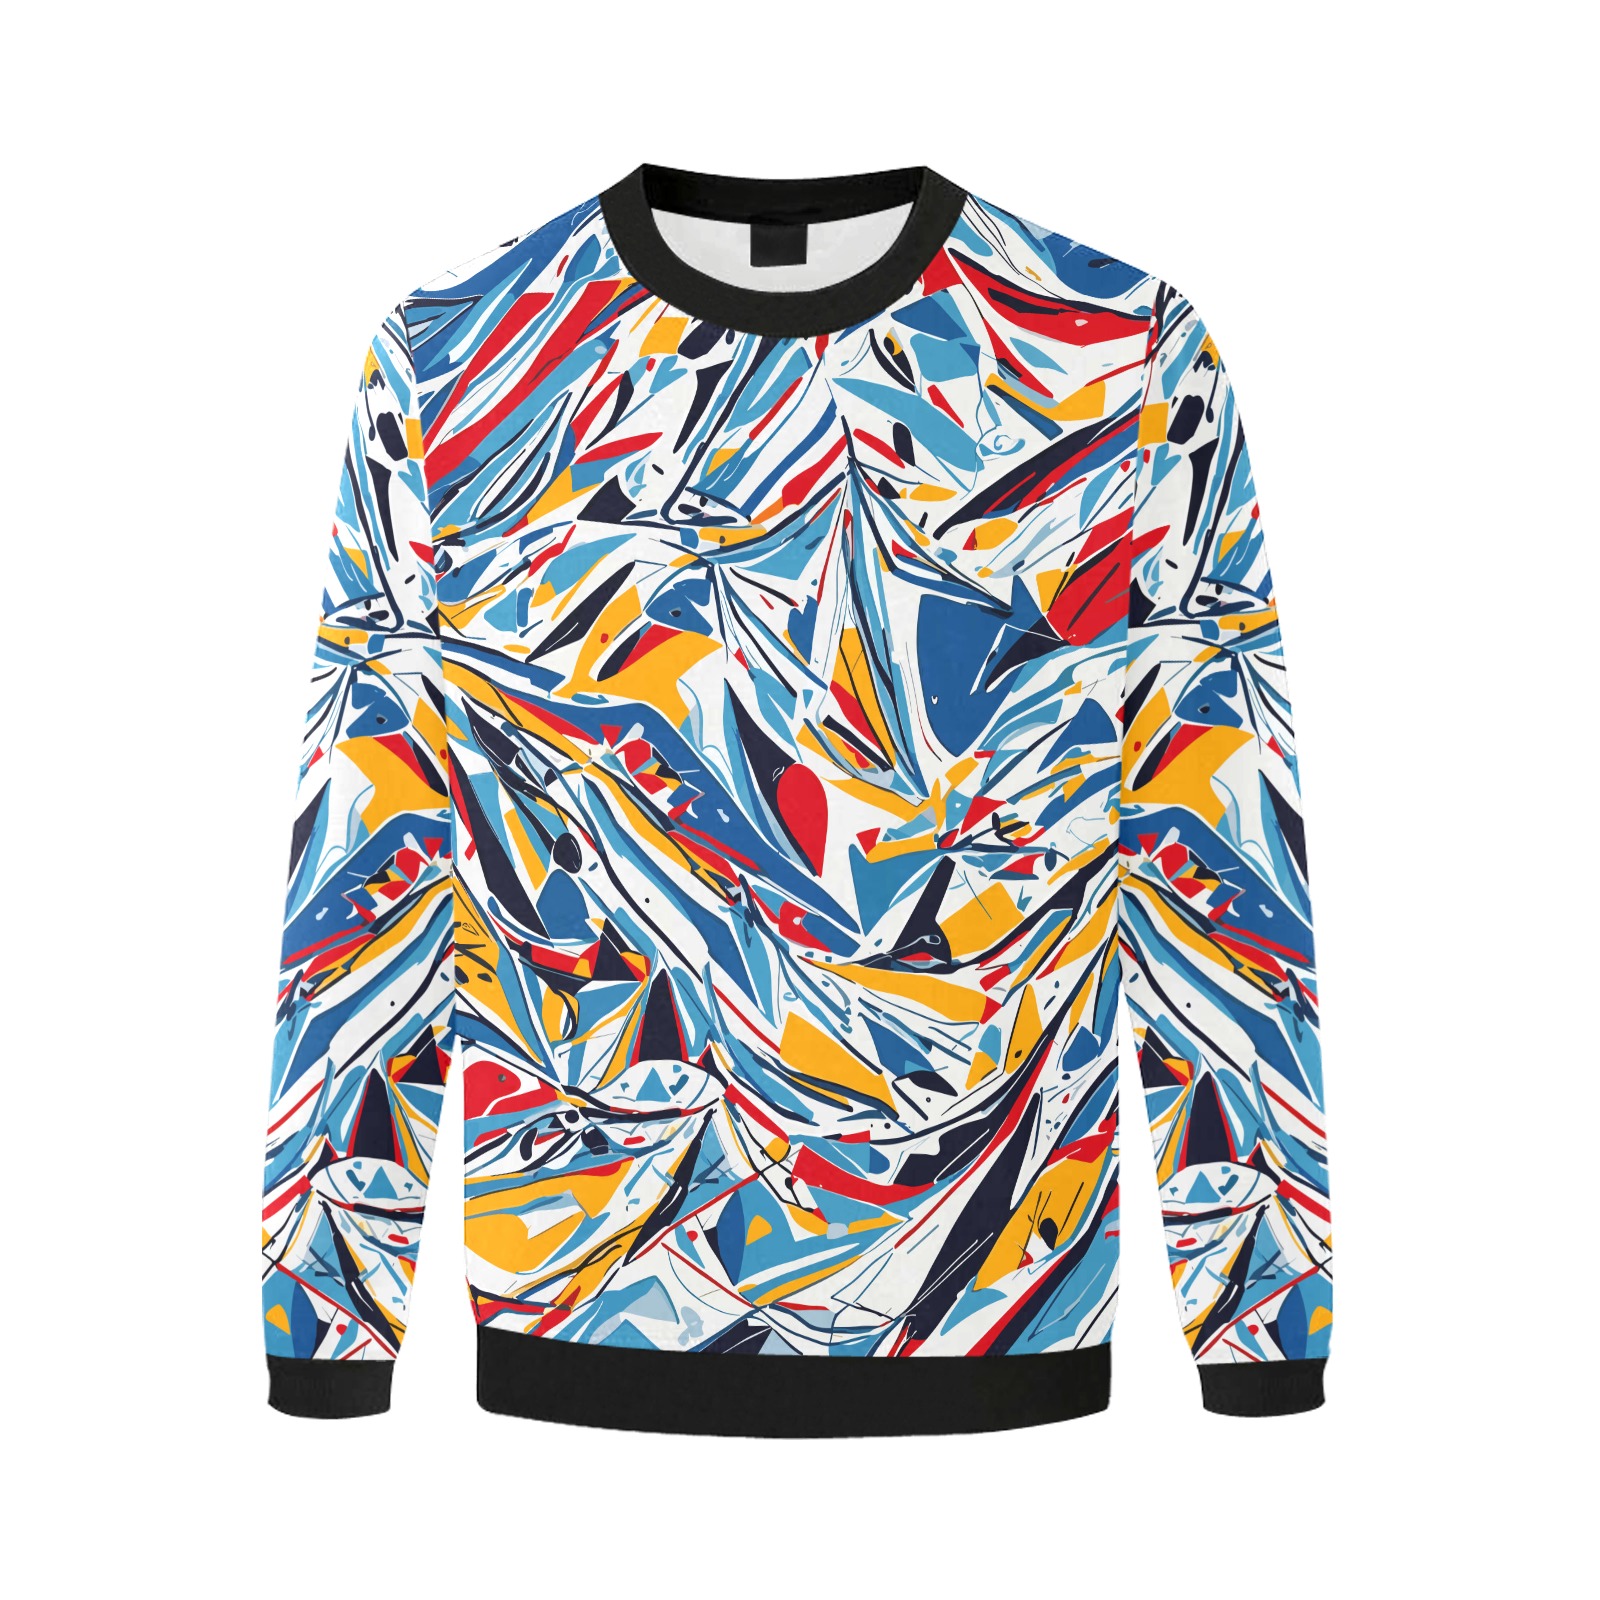 Awesome classy abstract art of a downhill skiing. Men's Oversized Fleece Crew Sweatshirt (Model H18)